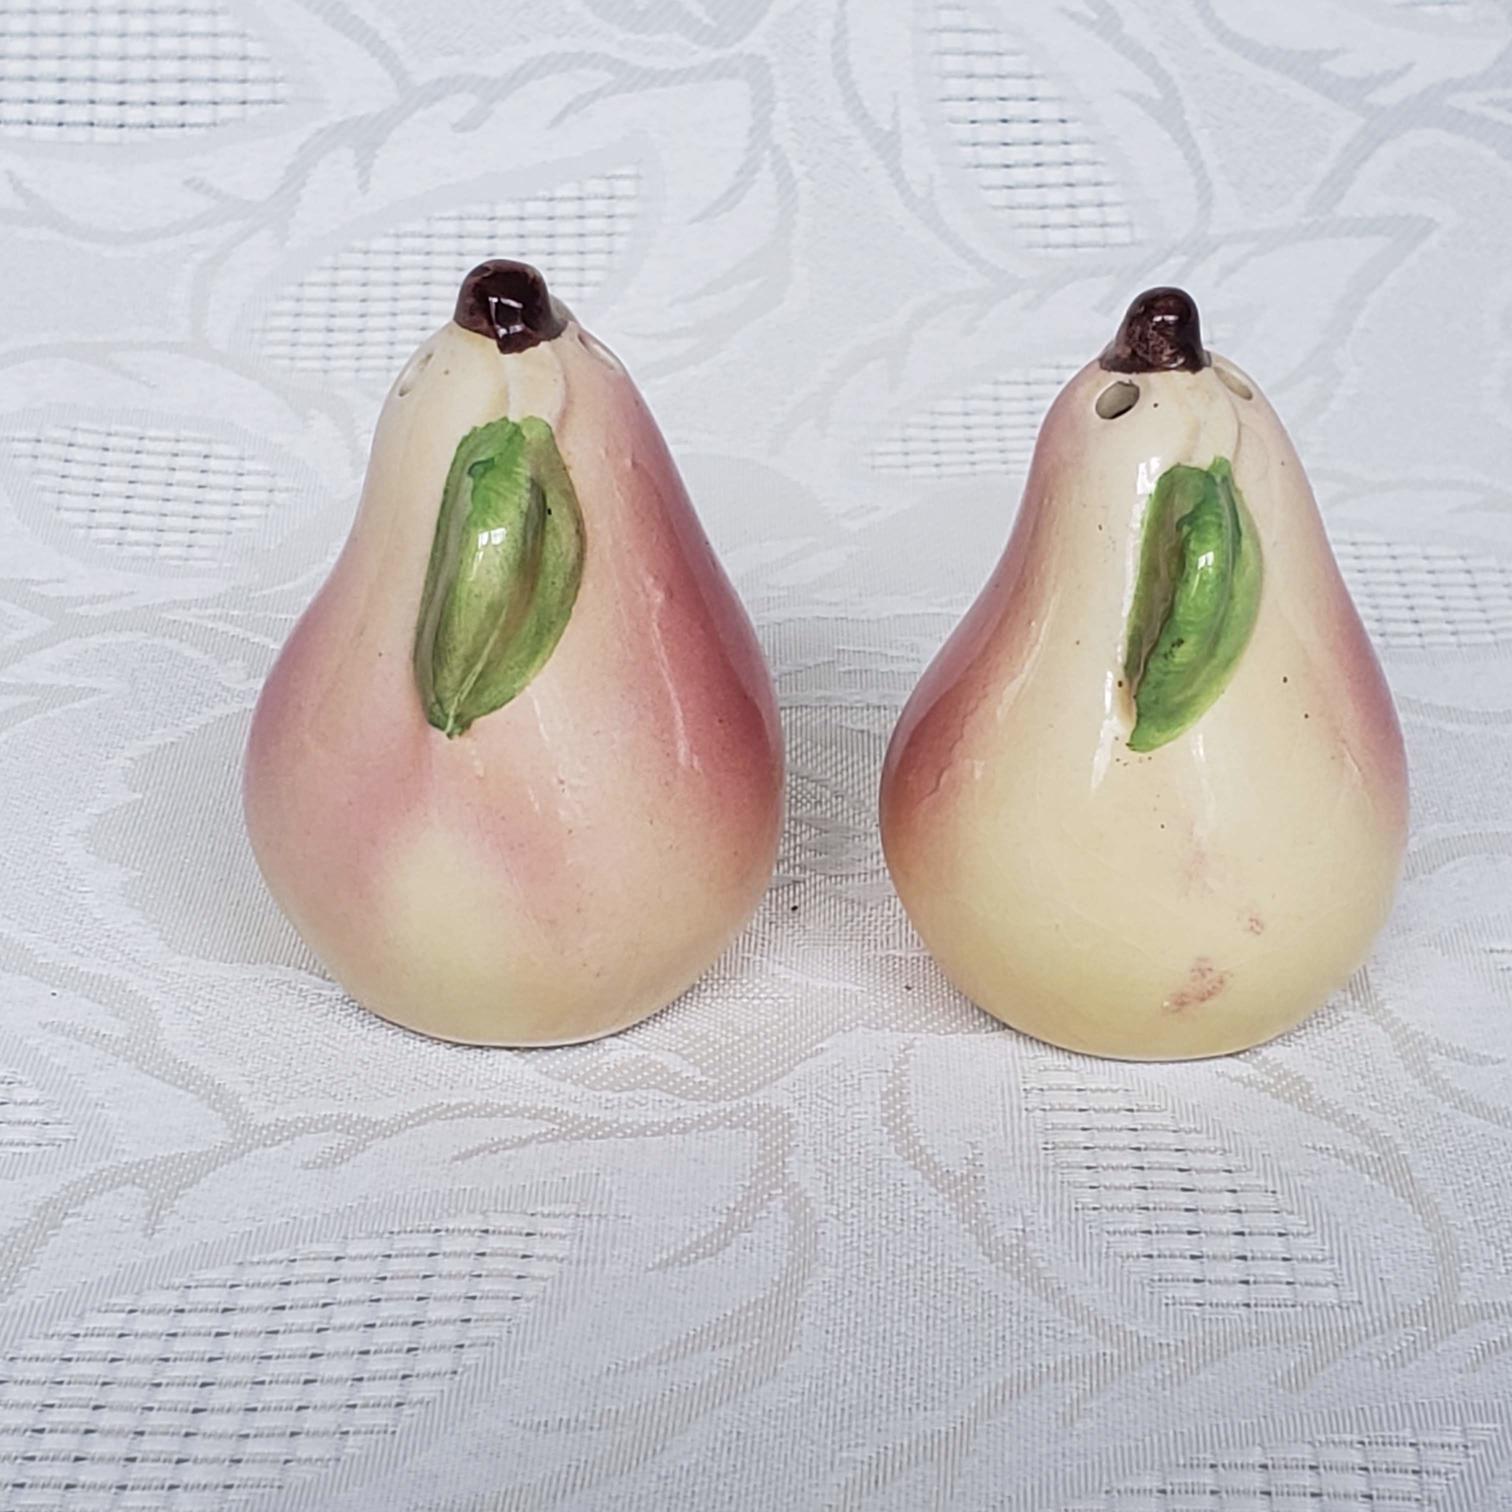 https://serstyle.com/wp-content/uploads/2020/01/Pear-Salt-and-Pepper-Shakers-with-Caddy-9.jpg